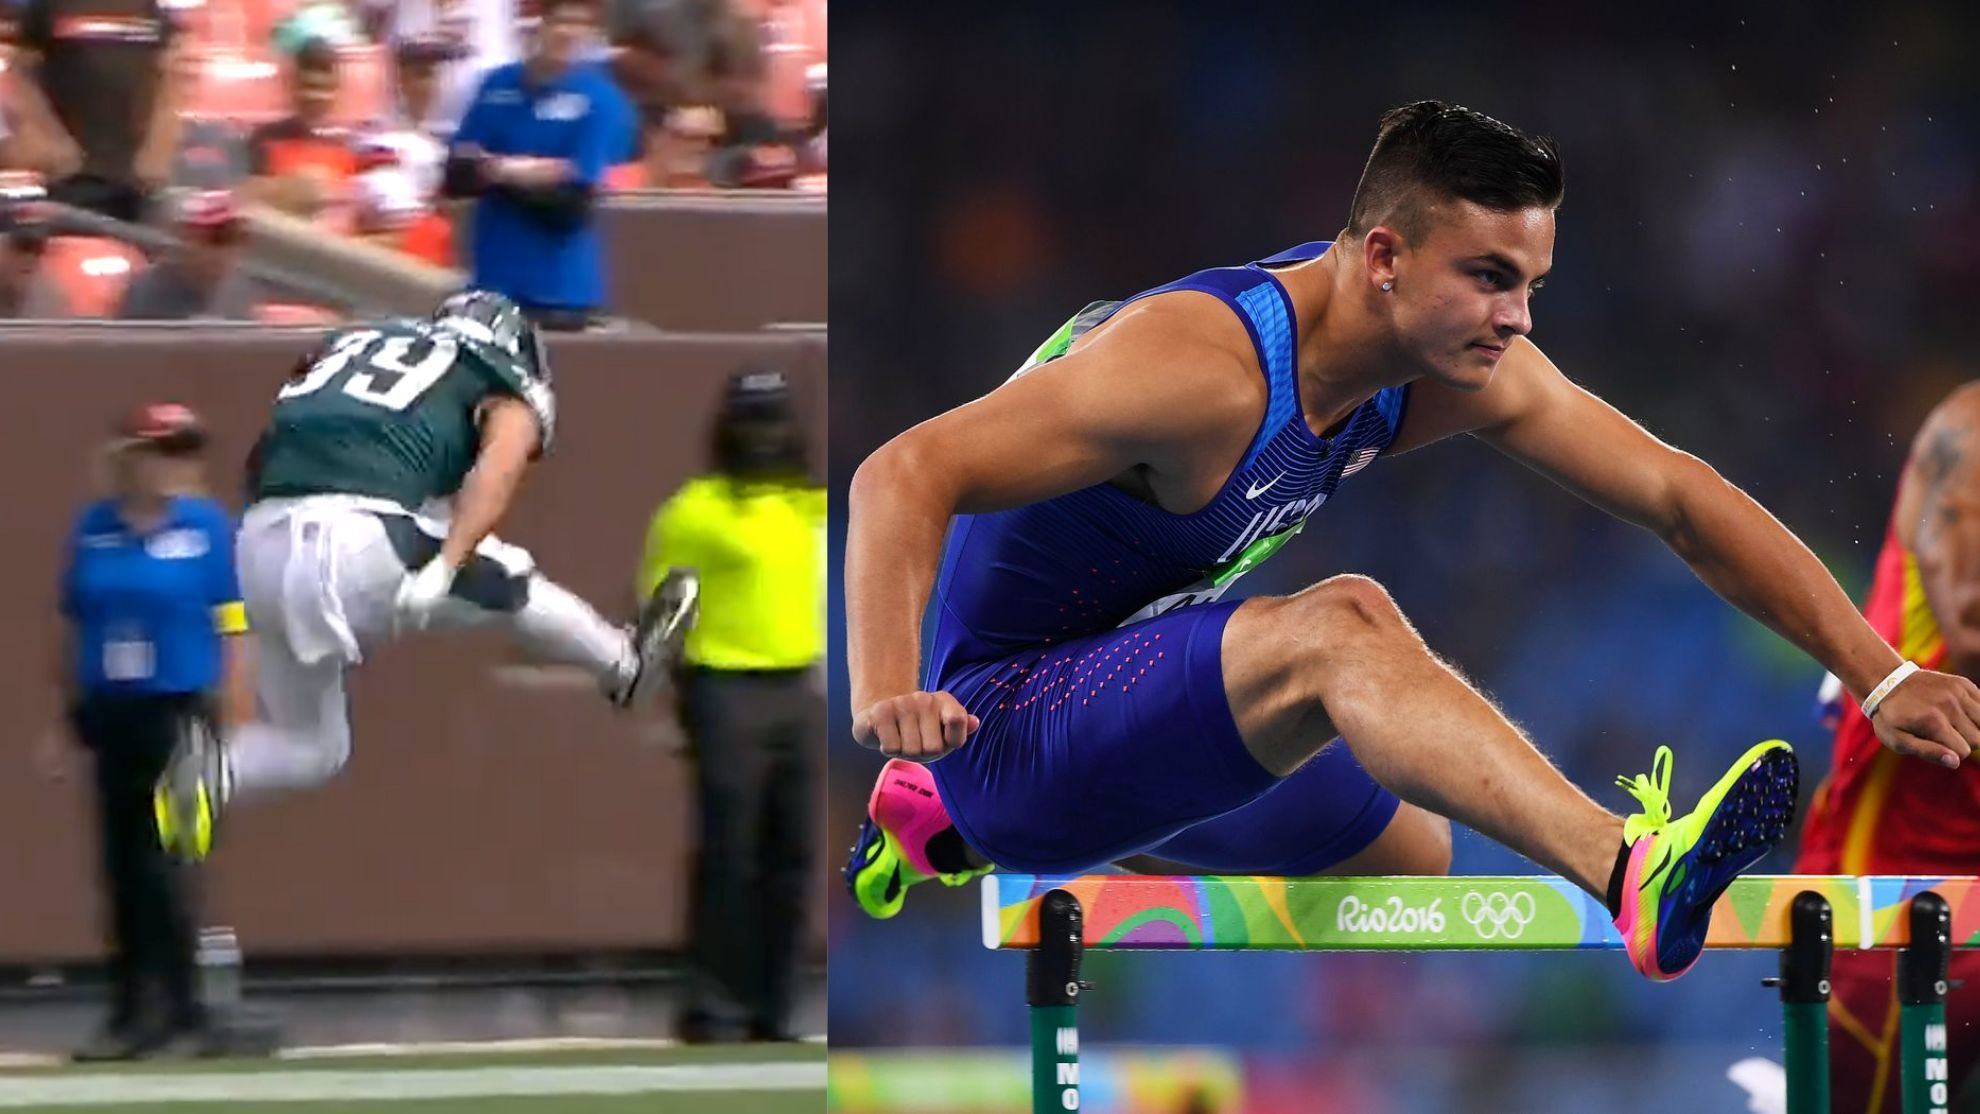 Devon Allen performed a hurdling celebration after he was able to showcase his speed and made a 55-yard touchdown.